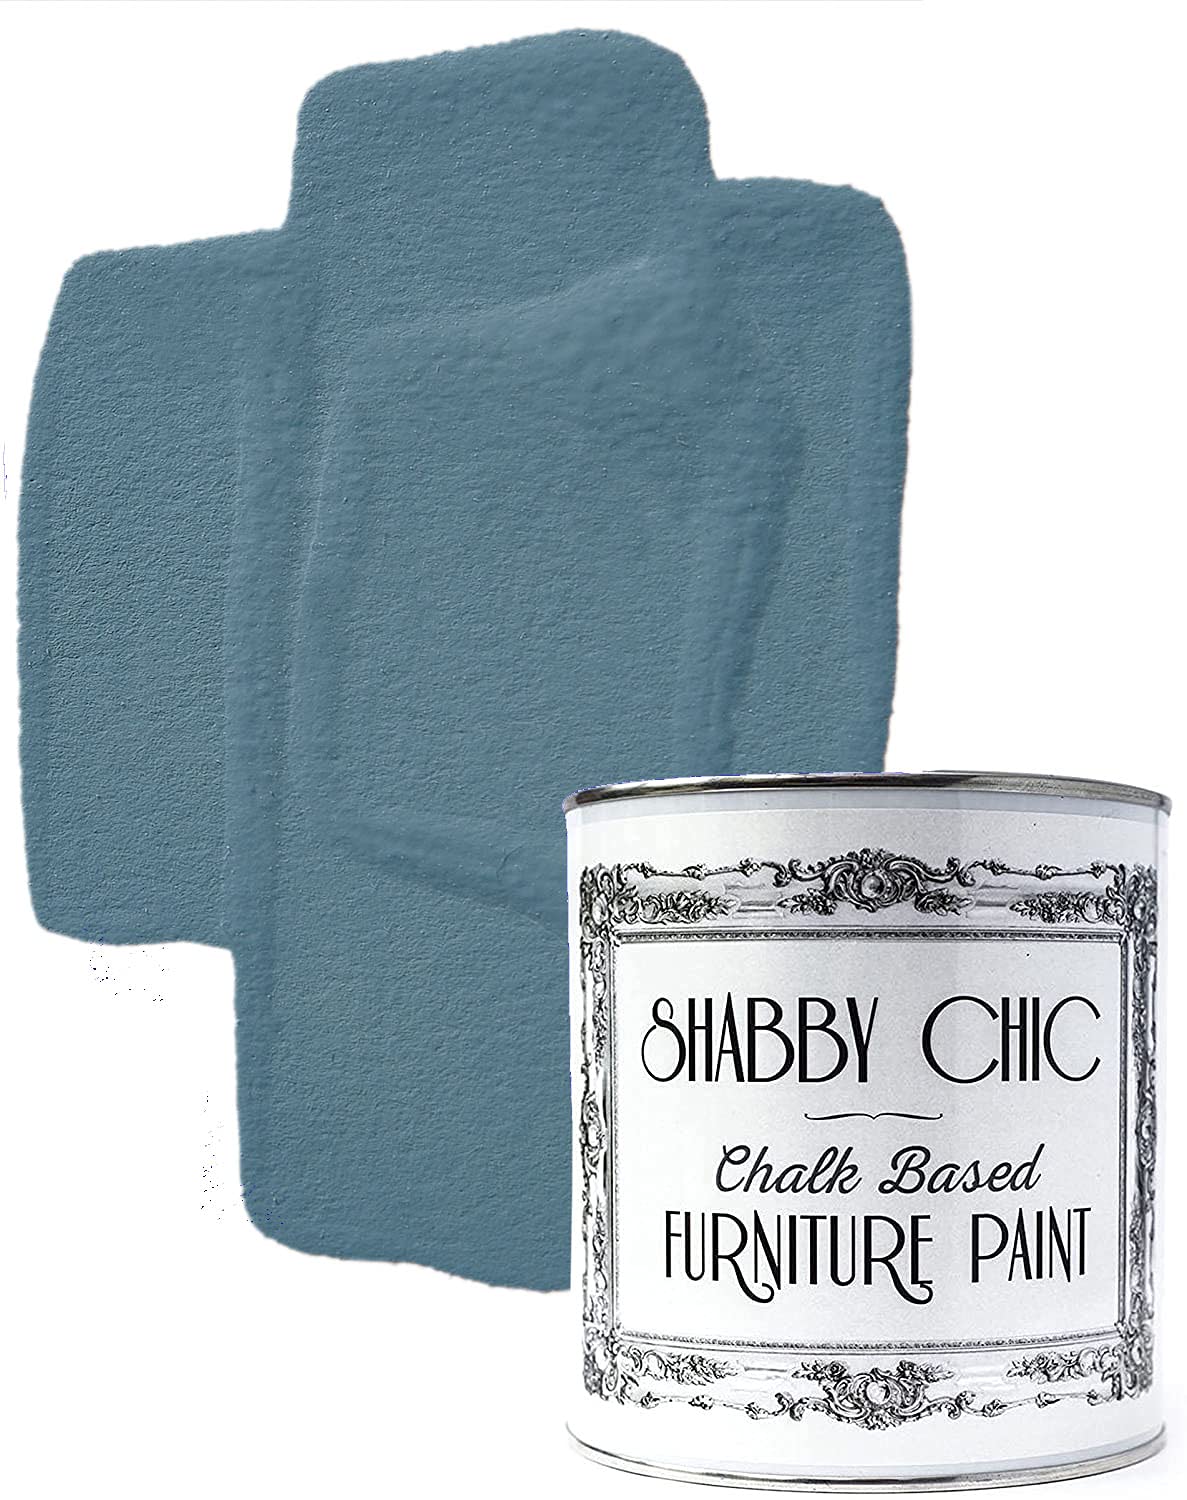 Shabby Chic Chalk Based Furniture Paint Shabby Chic Chalk Furniture Paint: Luxurious Chalk Finish Craft Paint for Home Decor, DIY, Wood Furniture - Interior Paints with